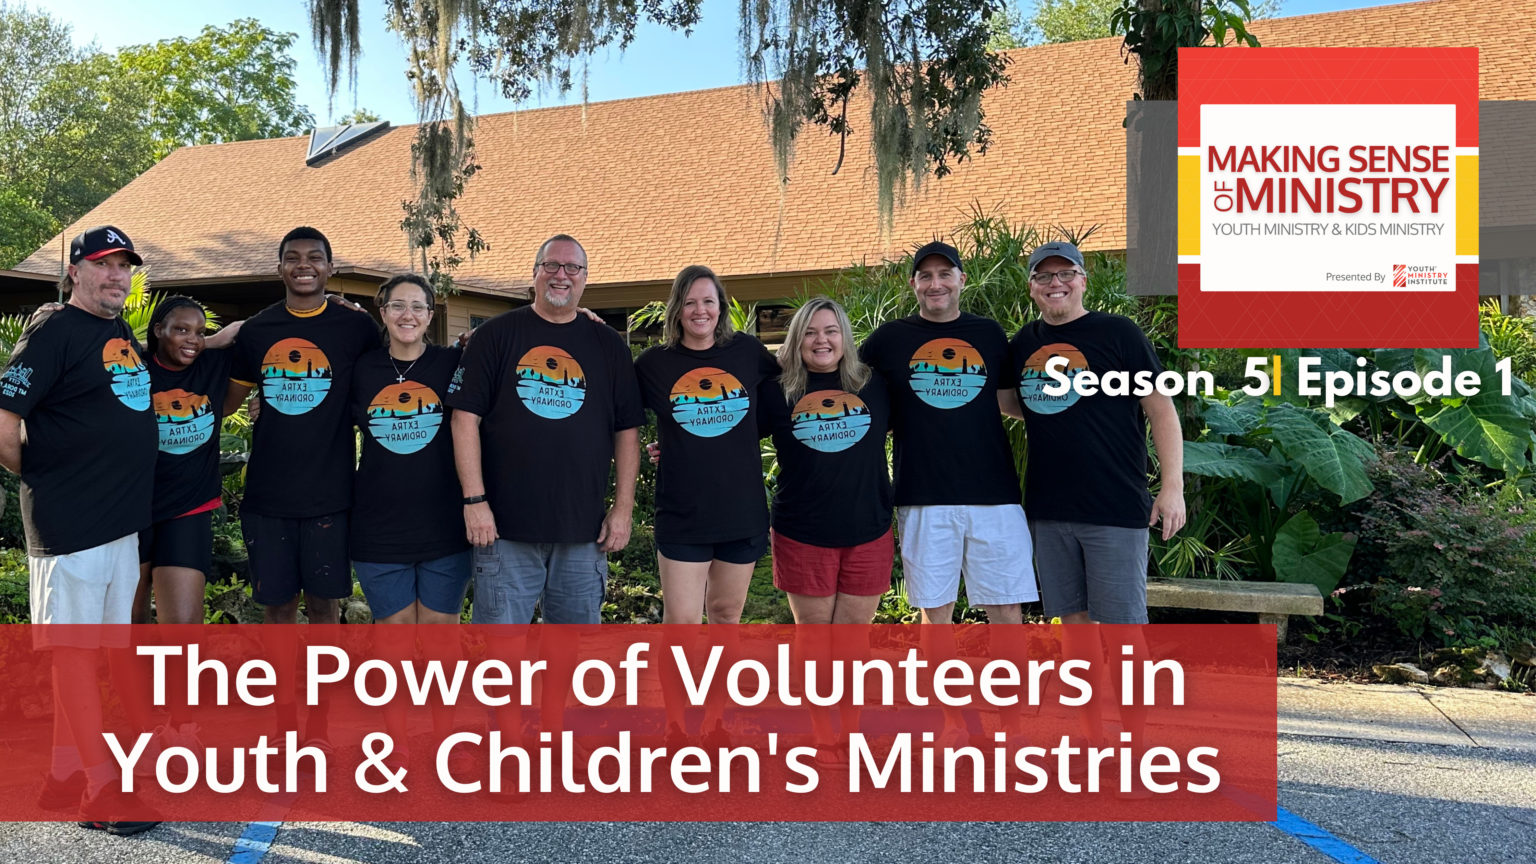 Volunteers standing together outside. The banner for Making Sense of Ministry podcast episode, season 5: episode 1.